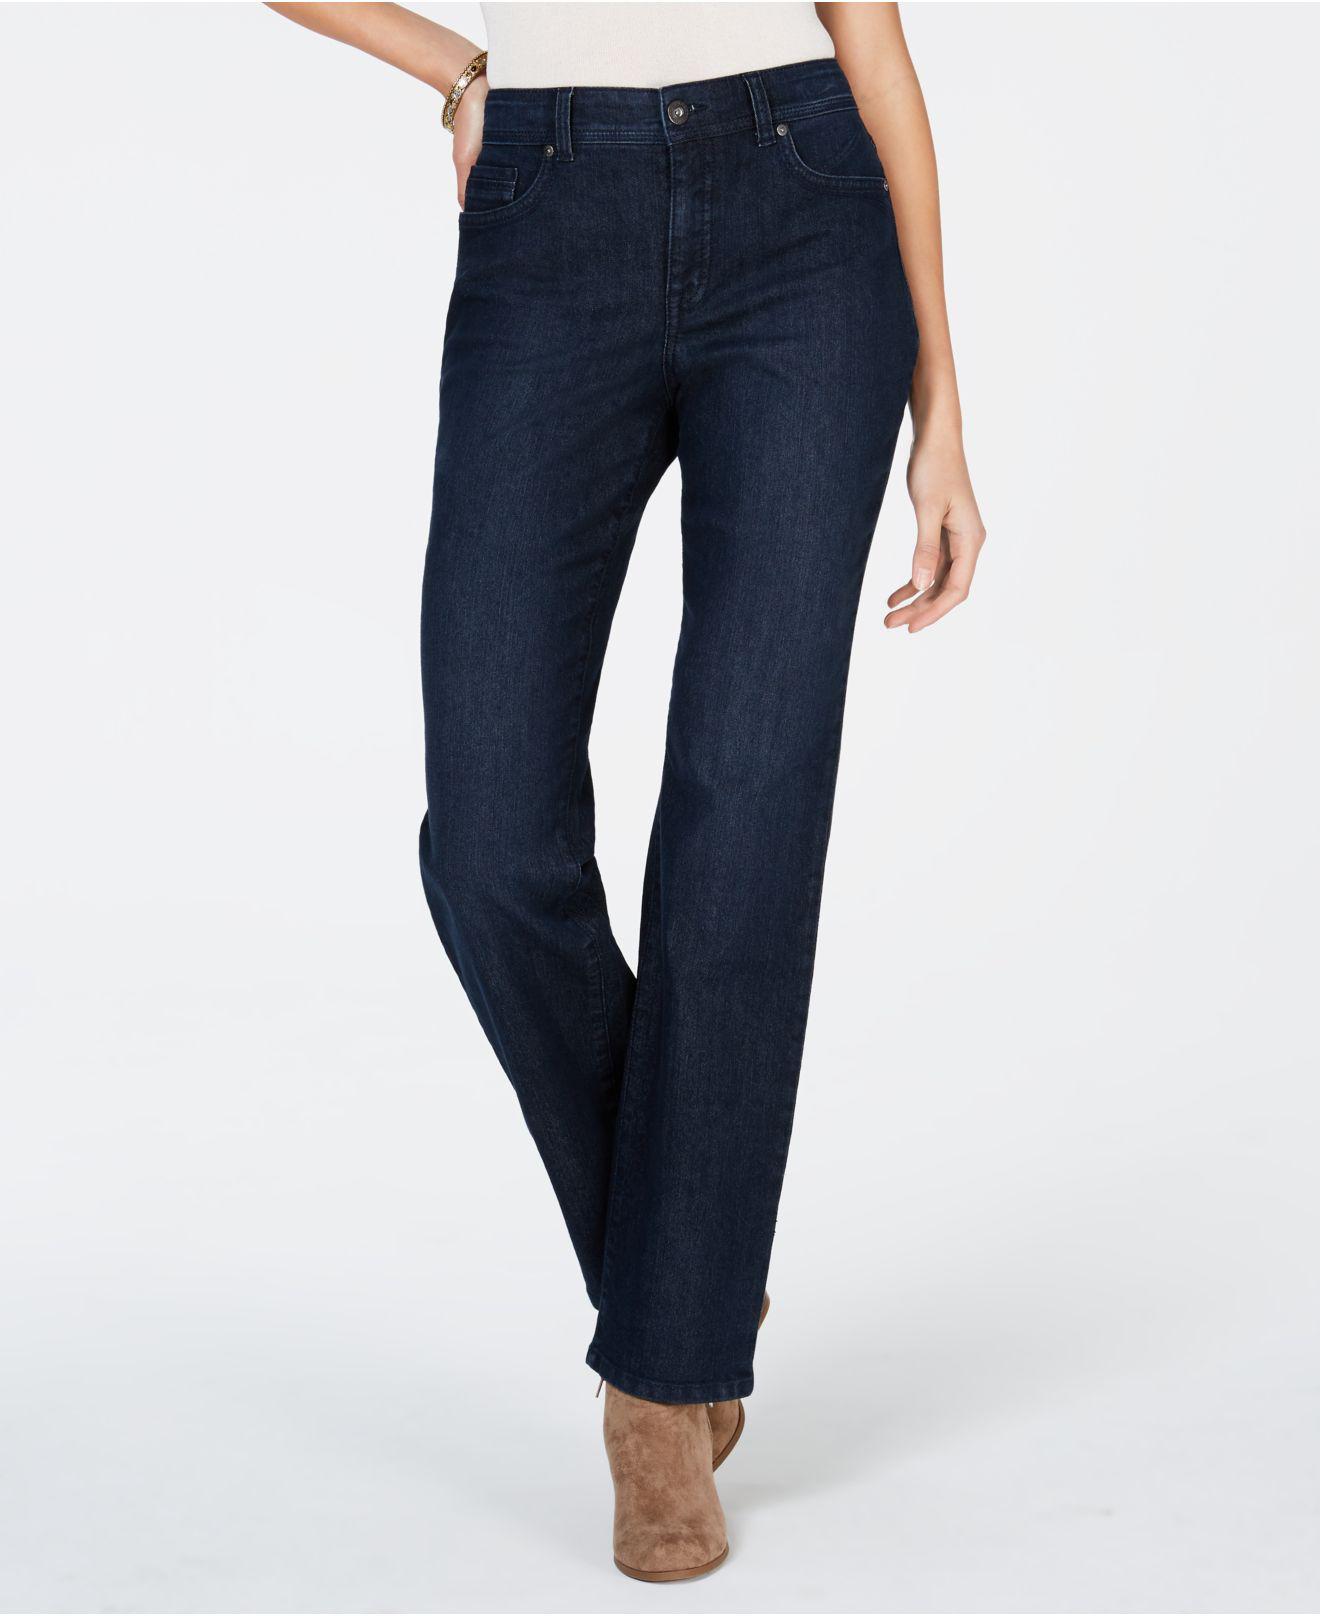 Lyst - Style & Co. Curvy-fit Straight Leg Jeans, Created For Macy's in Blue